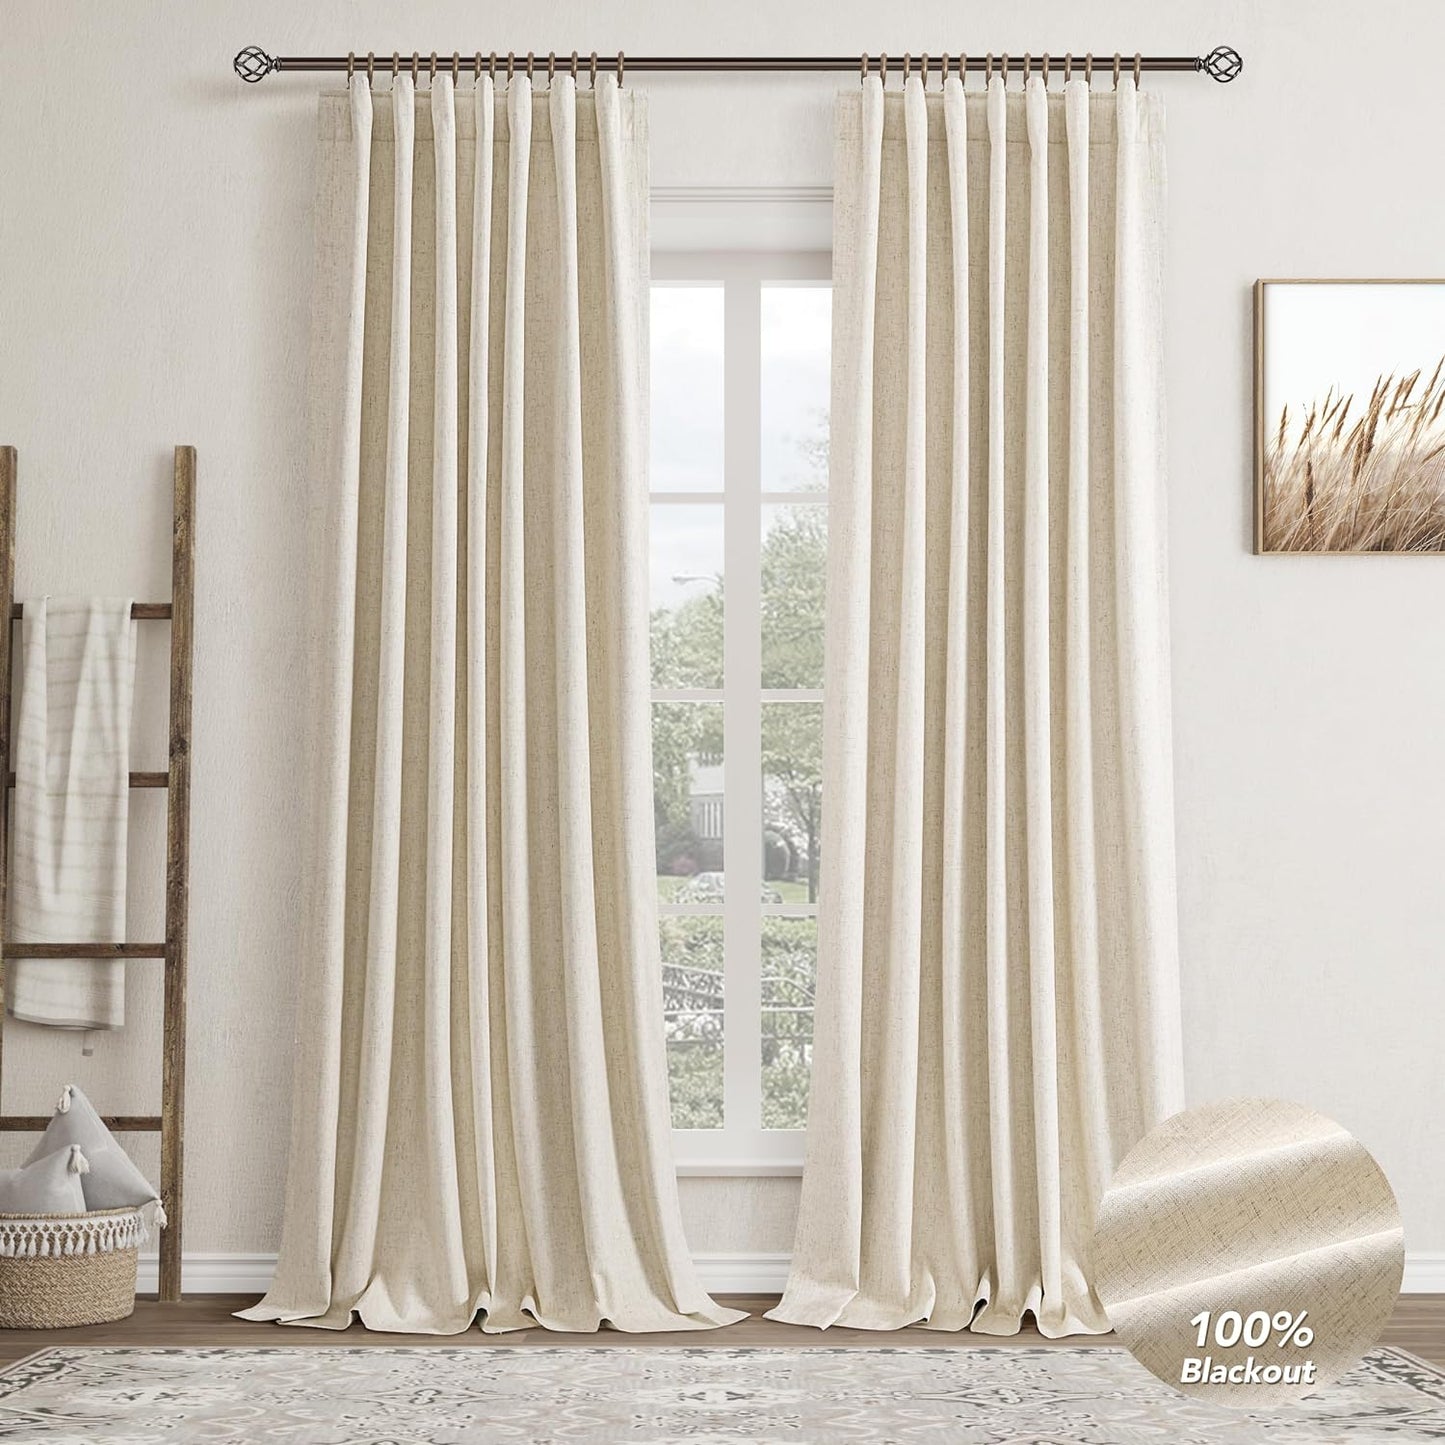 Cream Linen Black Out Curtains 80 Inch Length for Bedroom 2 Panel Set Back Tab Pocket Natural Room Darkening Window Blackout Curtains Modern Boho Thermal Insulated Drapes for Living Room 52X80  Nanspring Household Linen 52"W X 100"L 